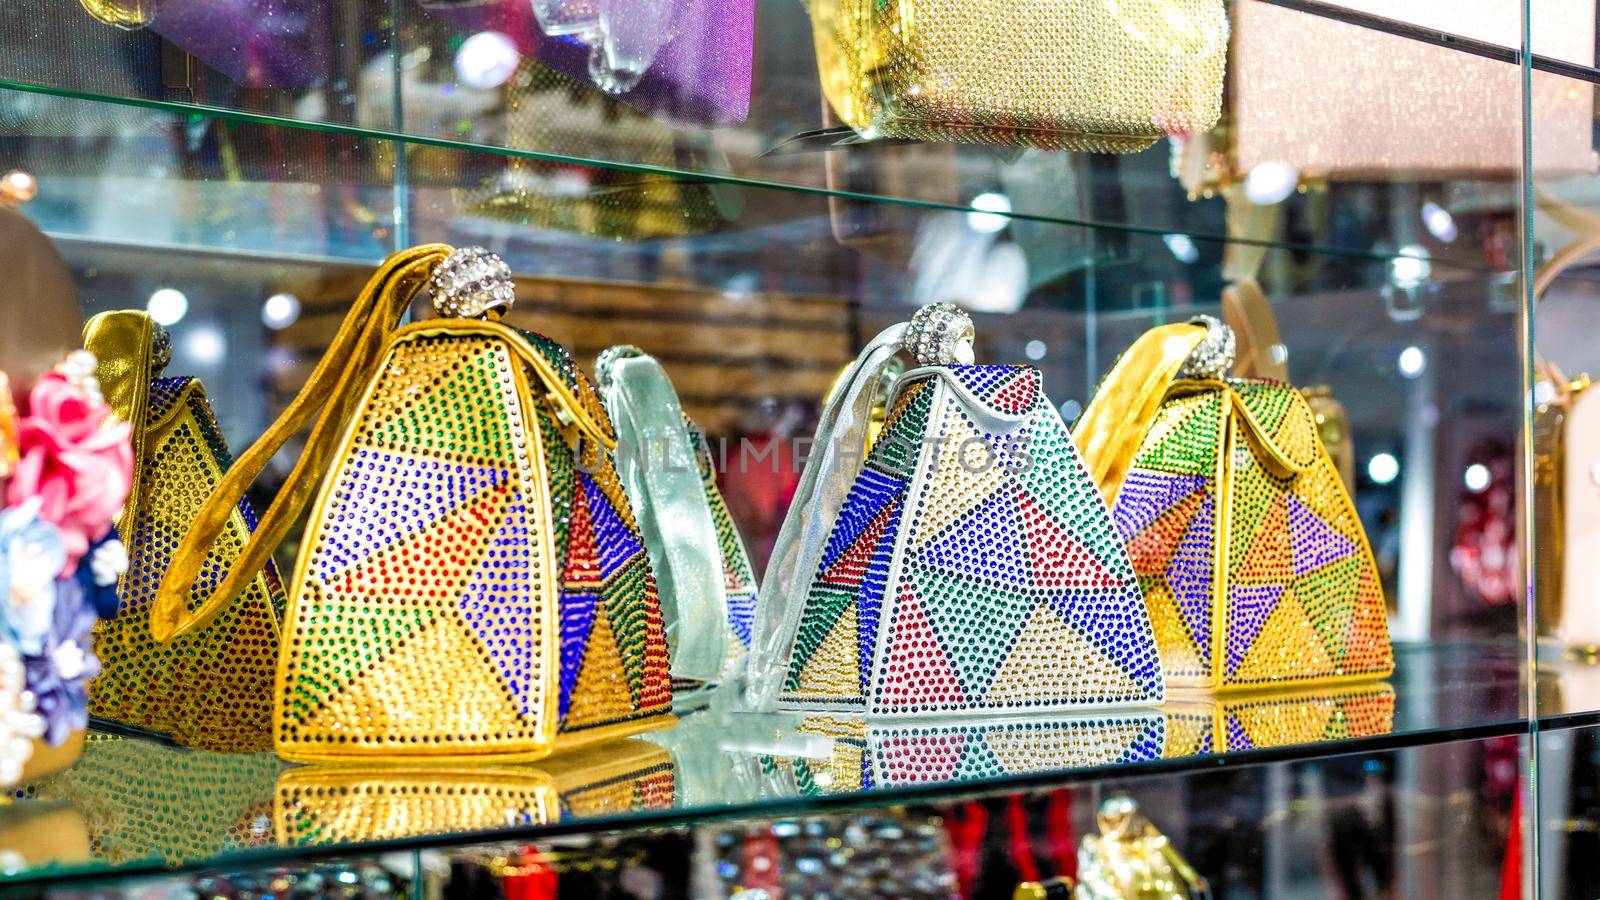 Colorful shiny women handbags in a store by ferhad